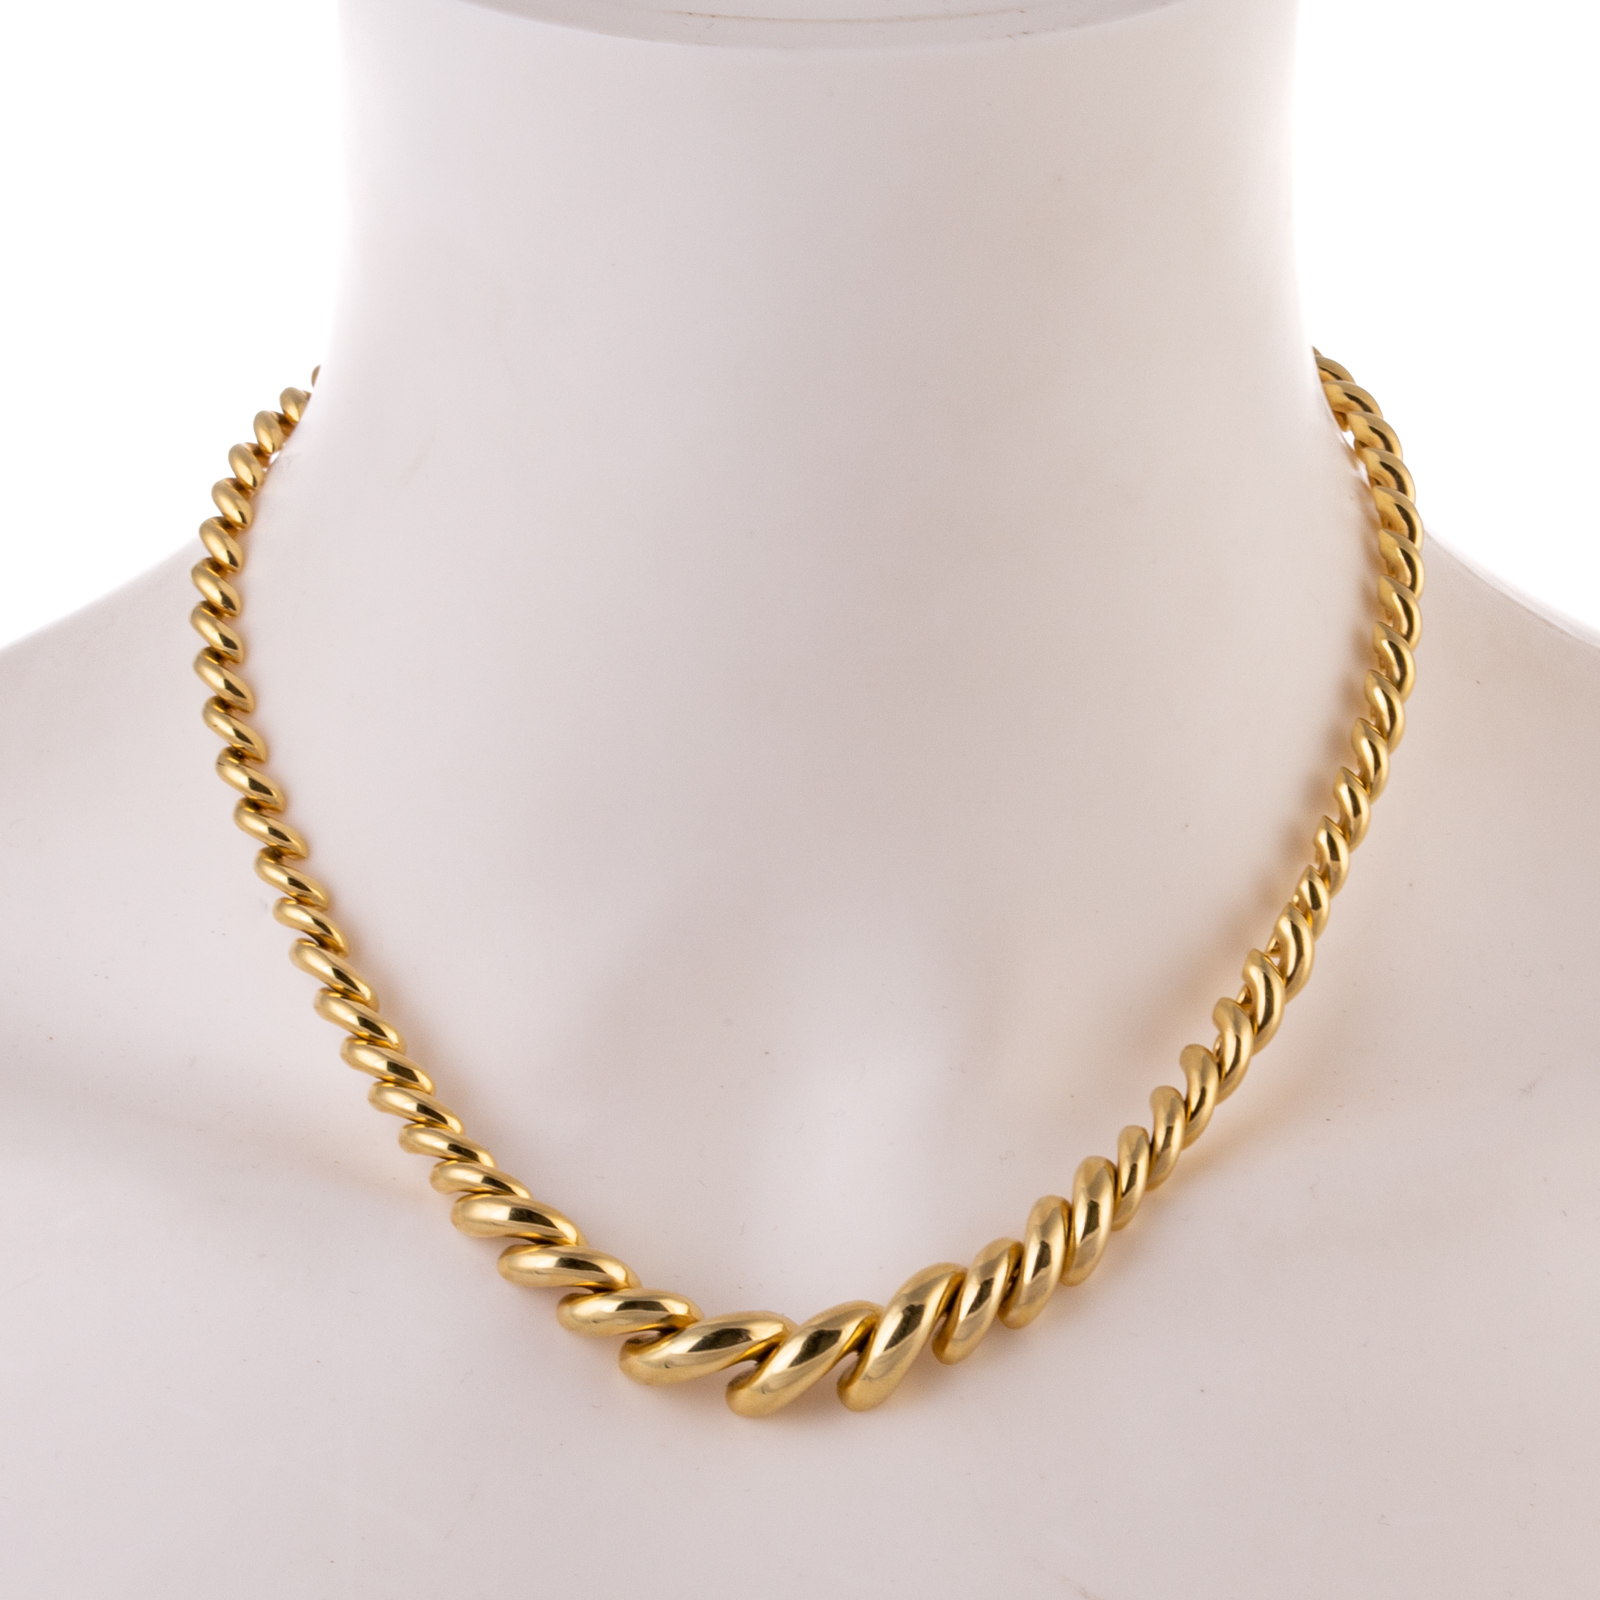 A SAN MARCO NECKLACE IN 14K YELLOW 3386d5